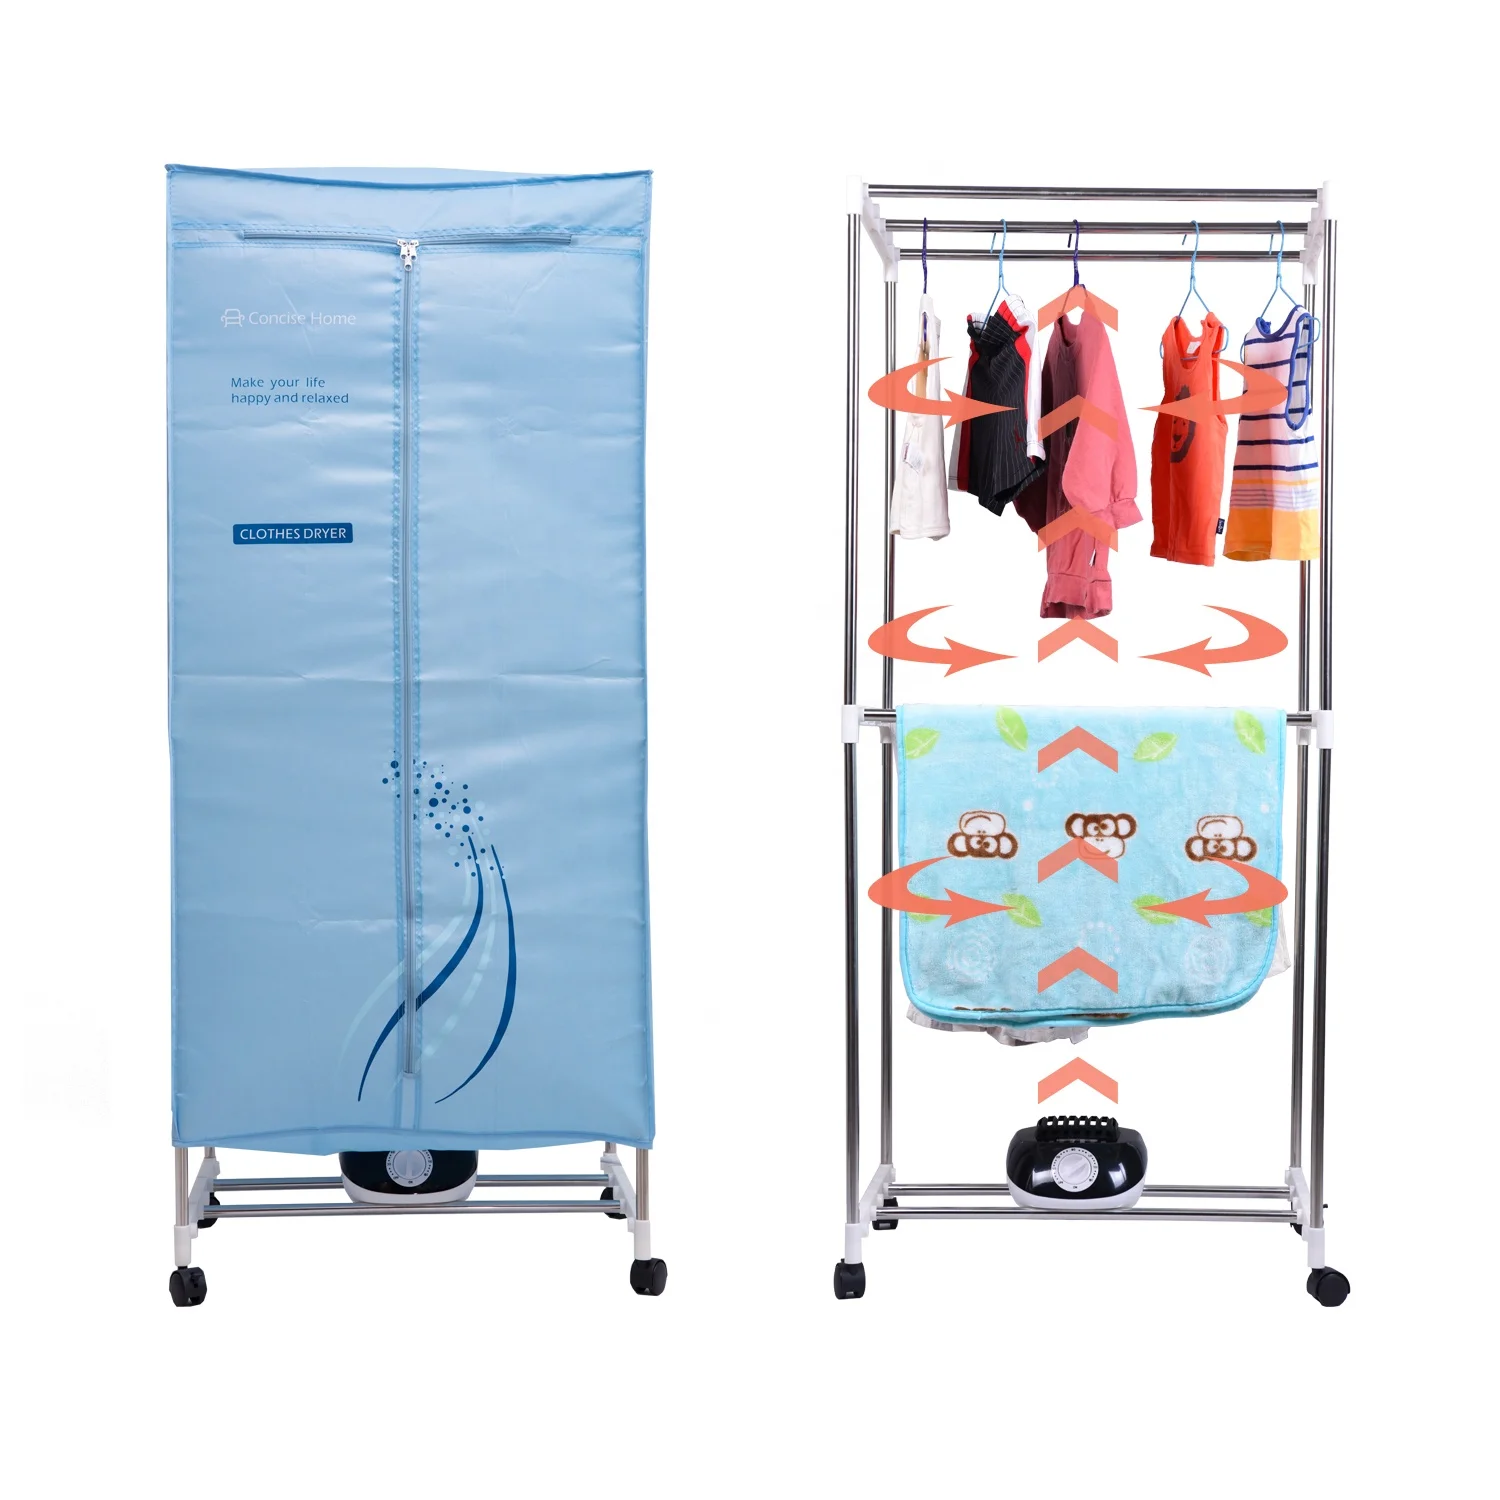 PIFCO P38003 Heated Clothes Dryer Suitable for All Fabrics 1000 W for sale online 